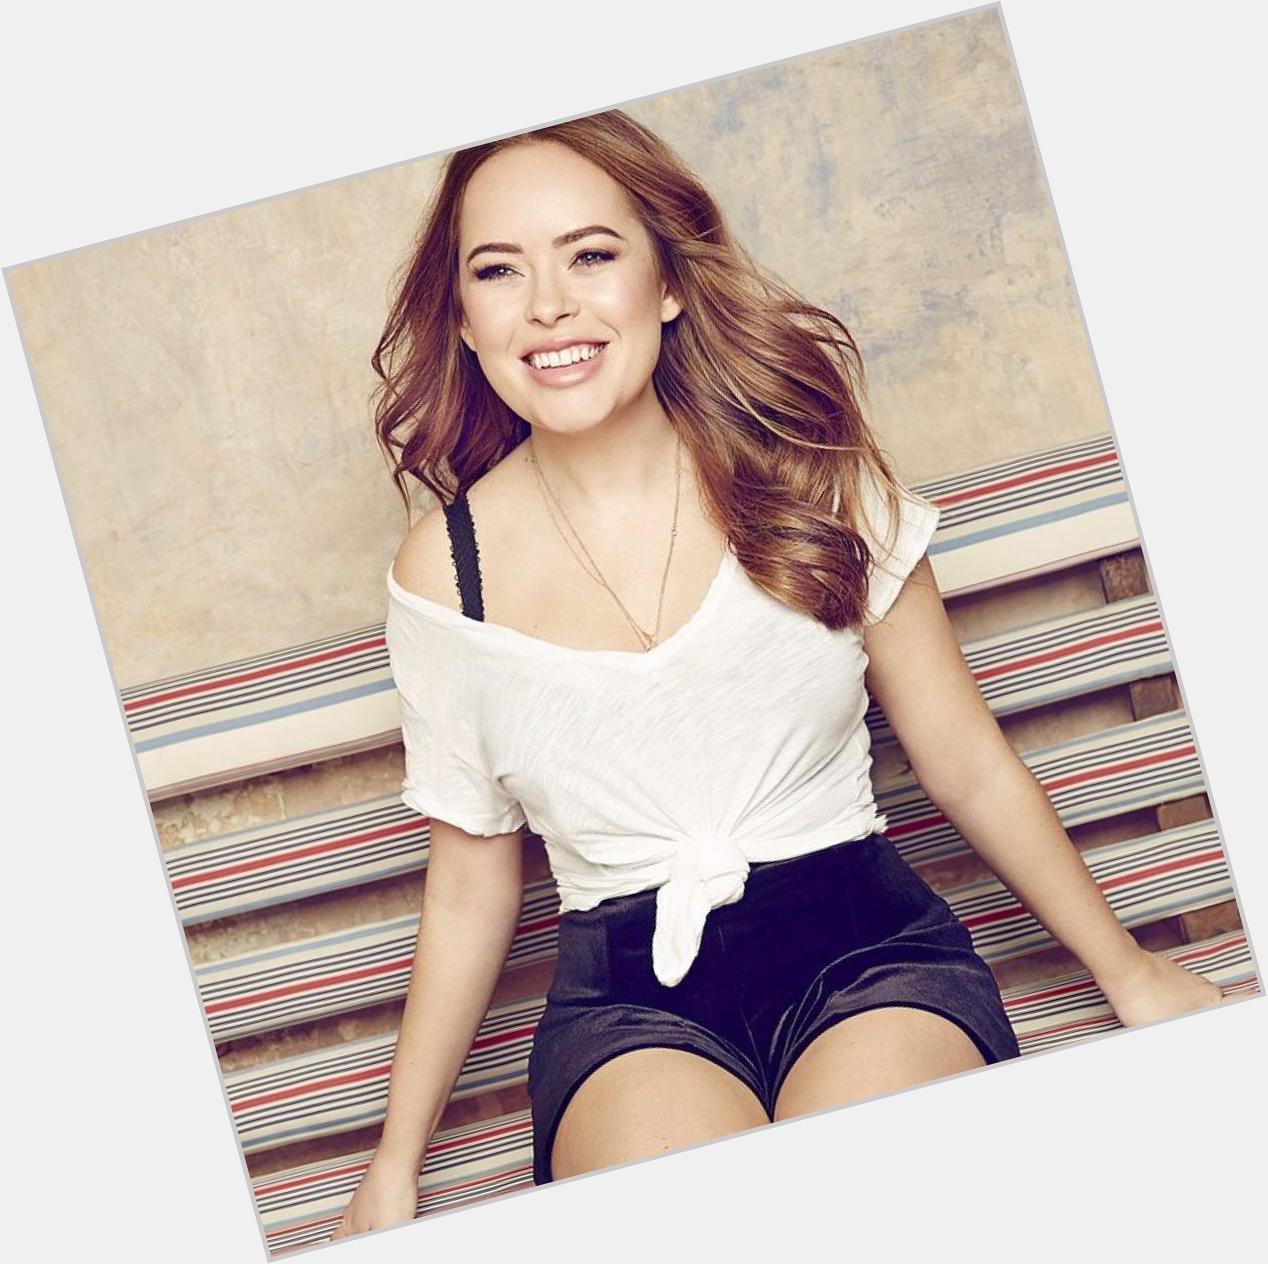 Happy birthday to my idol Tanya burr, you make me smile couldn\t ask for a better idol    